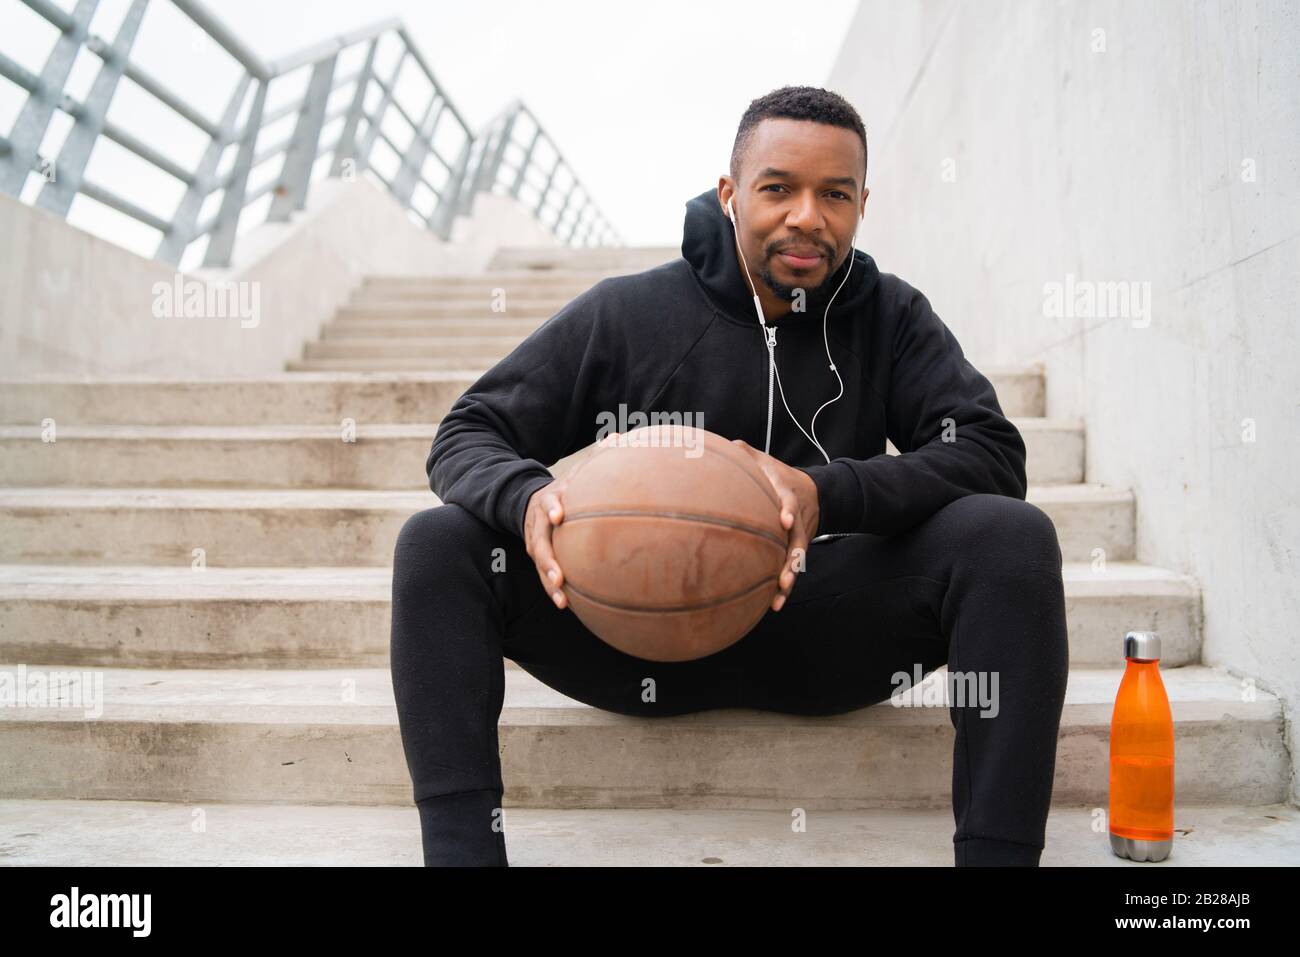 Portrait of an athletic man holding a basket ball while sitting on concrete stairs. Sport concept. Stock Photo